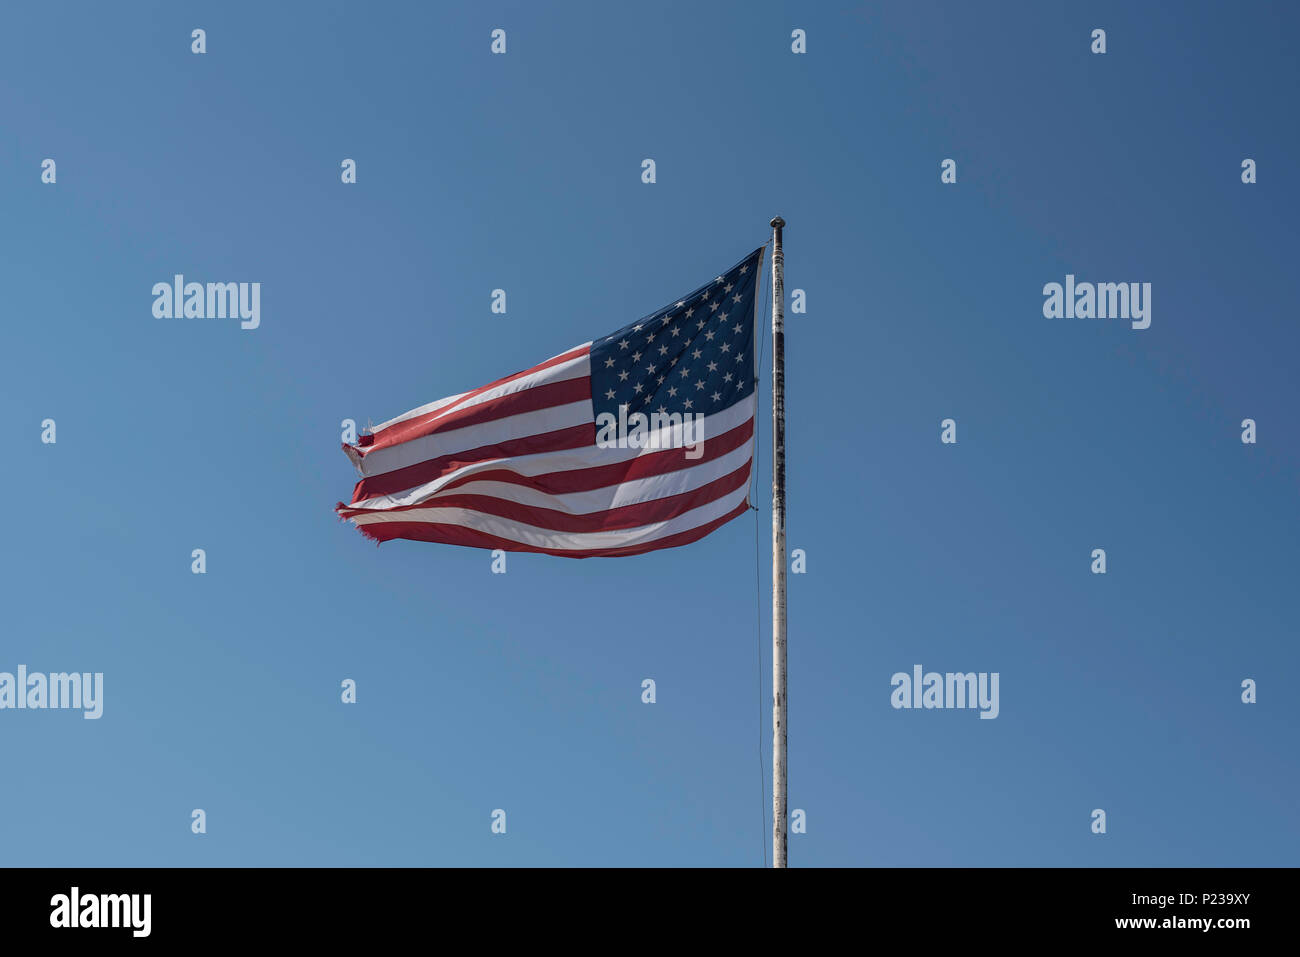 American stars and stripes flag blowing in the wind against a blue sky Stock Photo